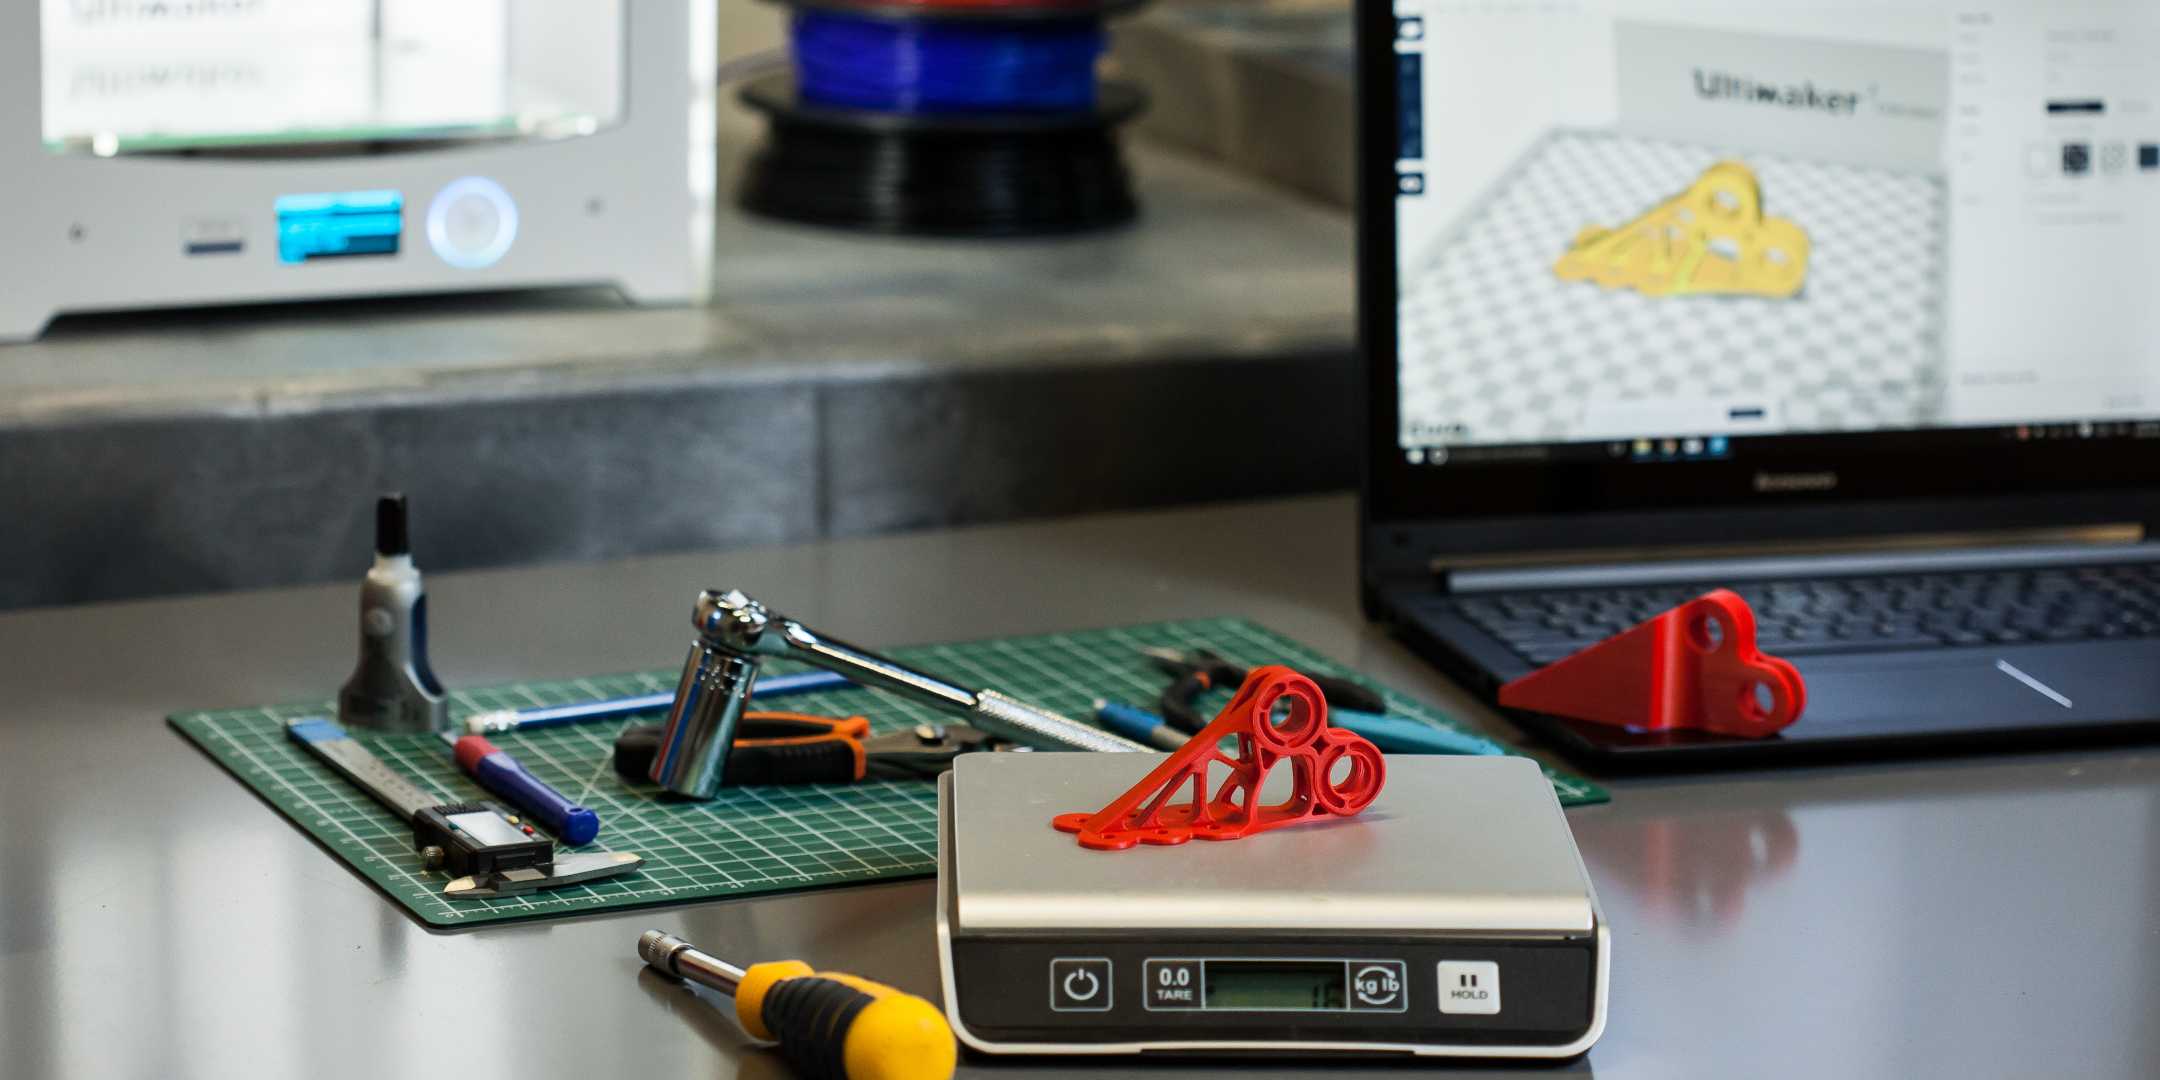 3D print your own prototypes